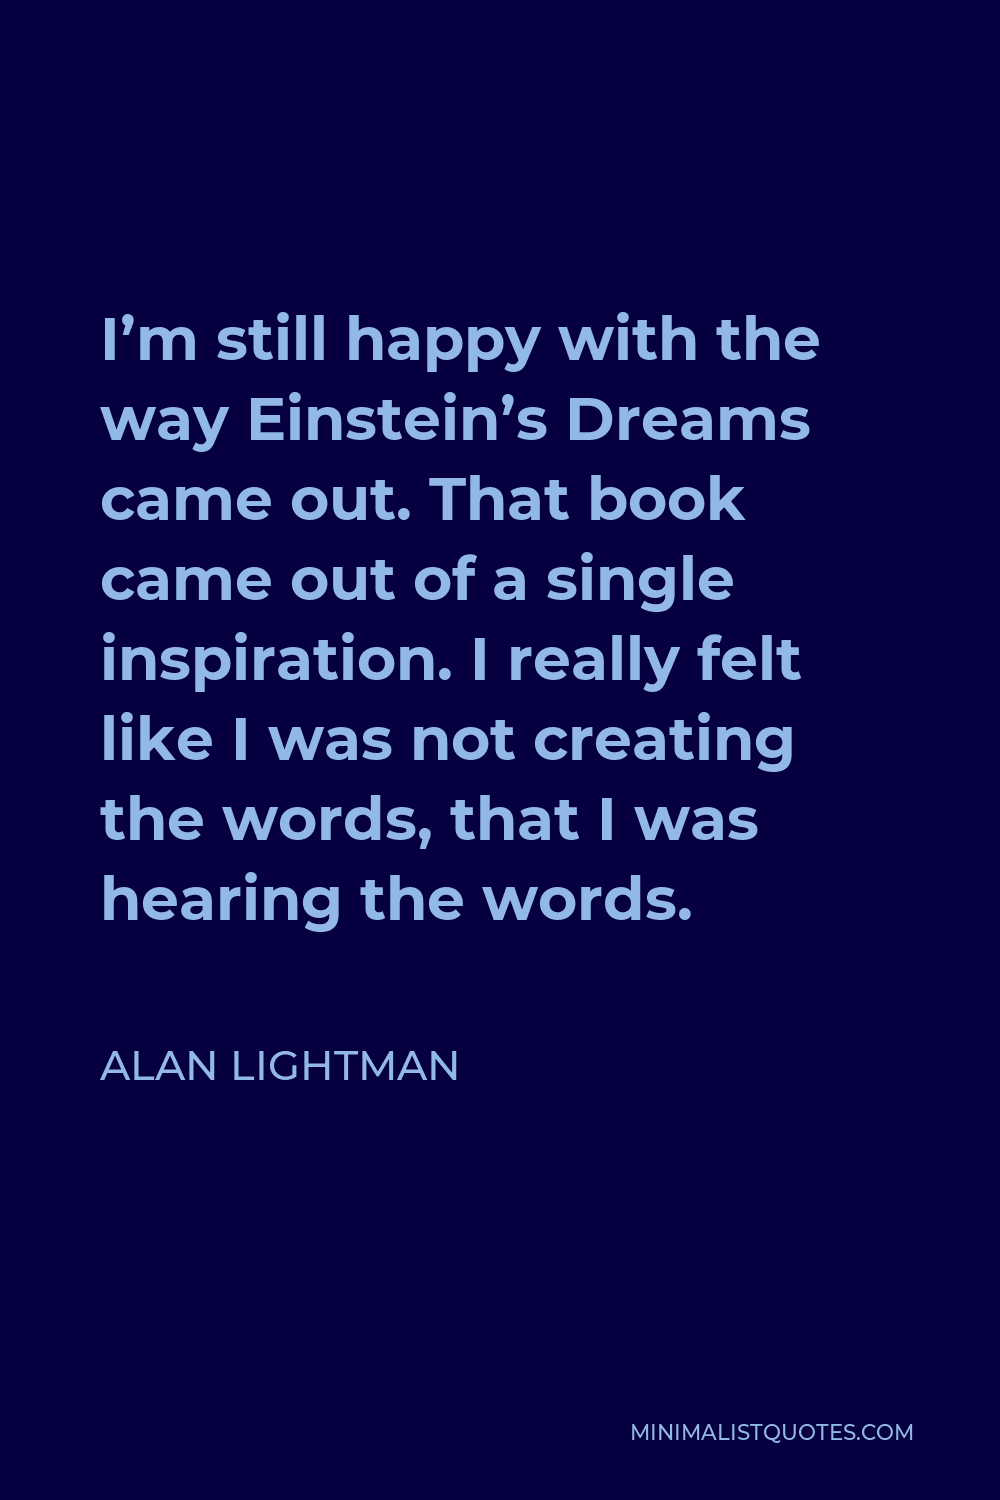 Alan Lightman Quote - I’m still happy with the way Einstein’s Dreams came out. That book came out of a single inspiration. I really felt like I was not creating the words, that I was hearing the words.